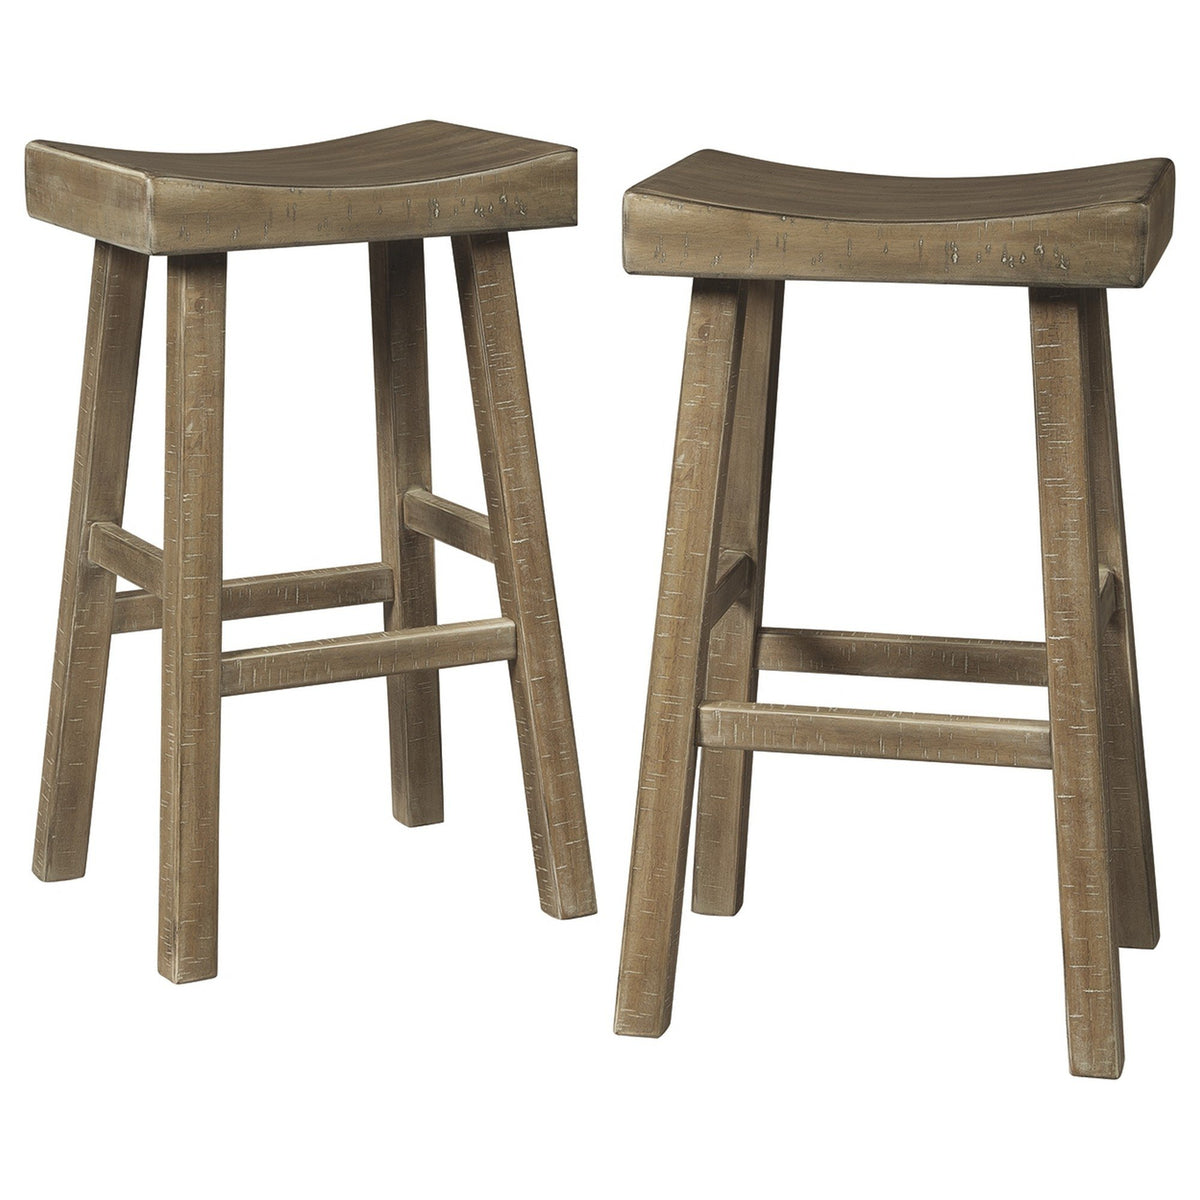 31 Inch Wooden Saddle Stool with Angular Legs, Set of 2, Brown - BM227042